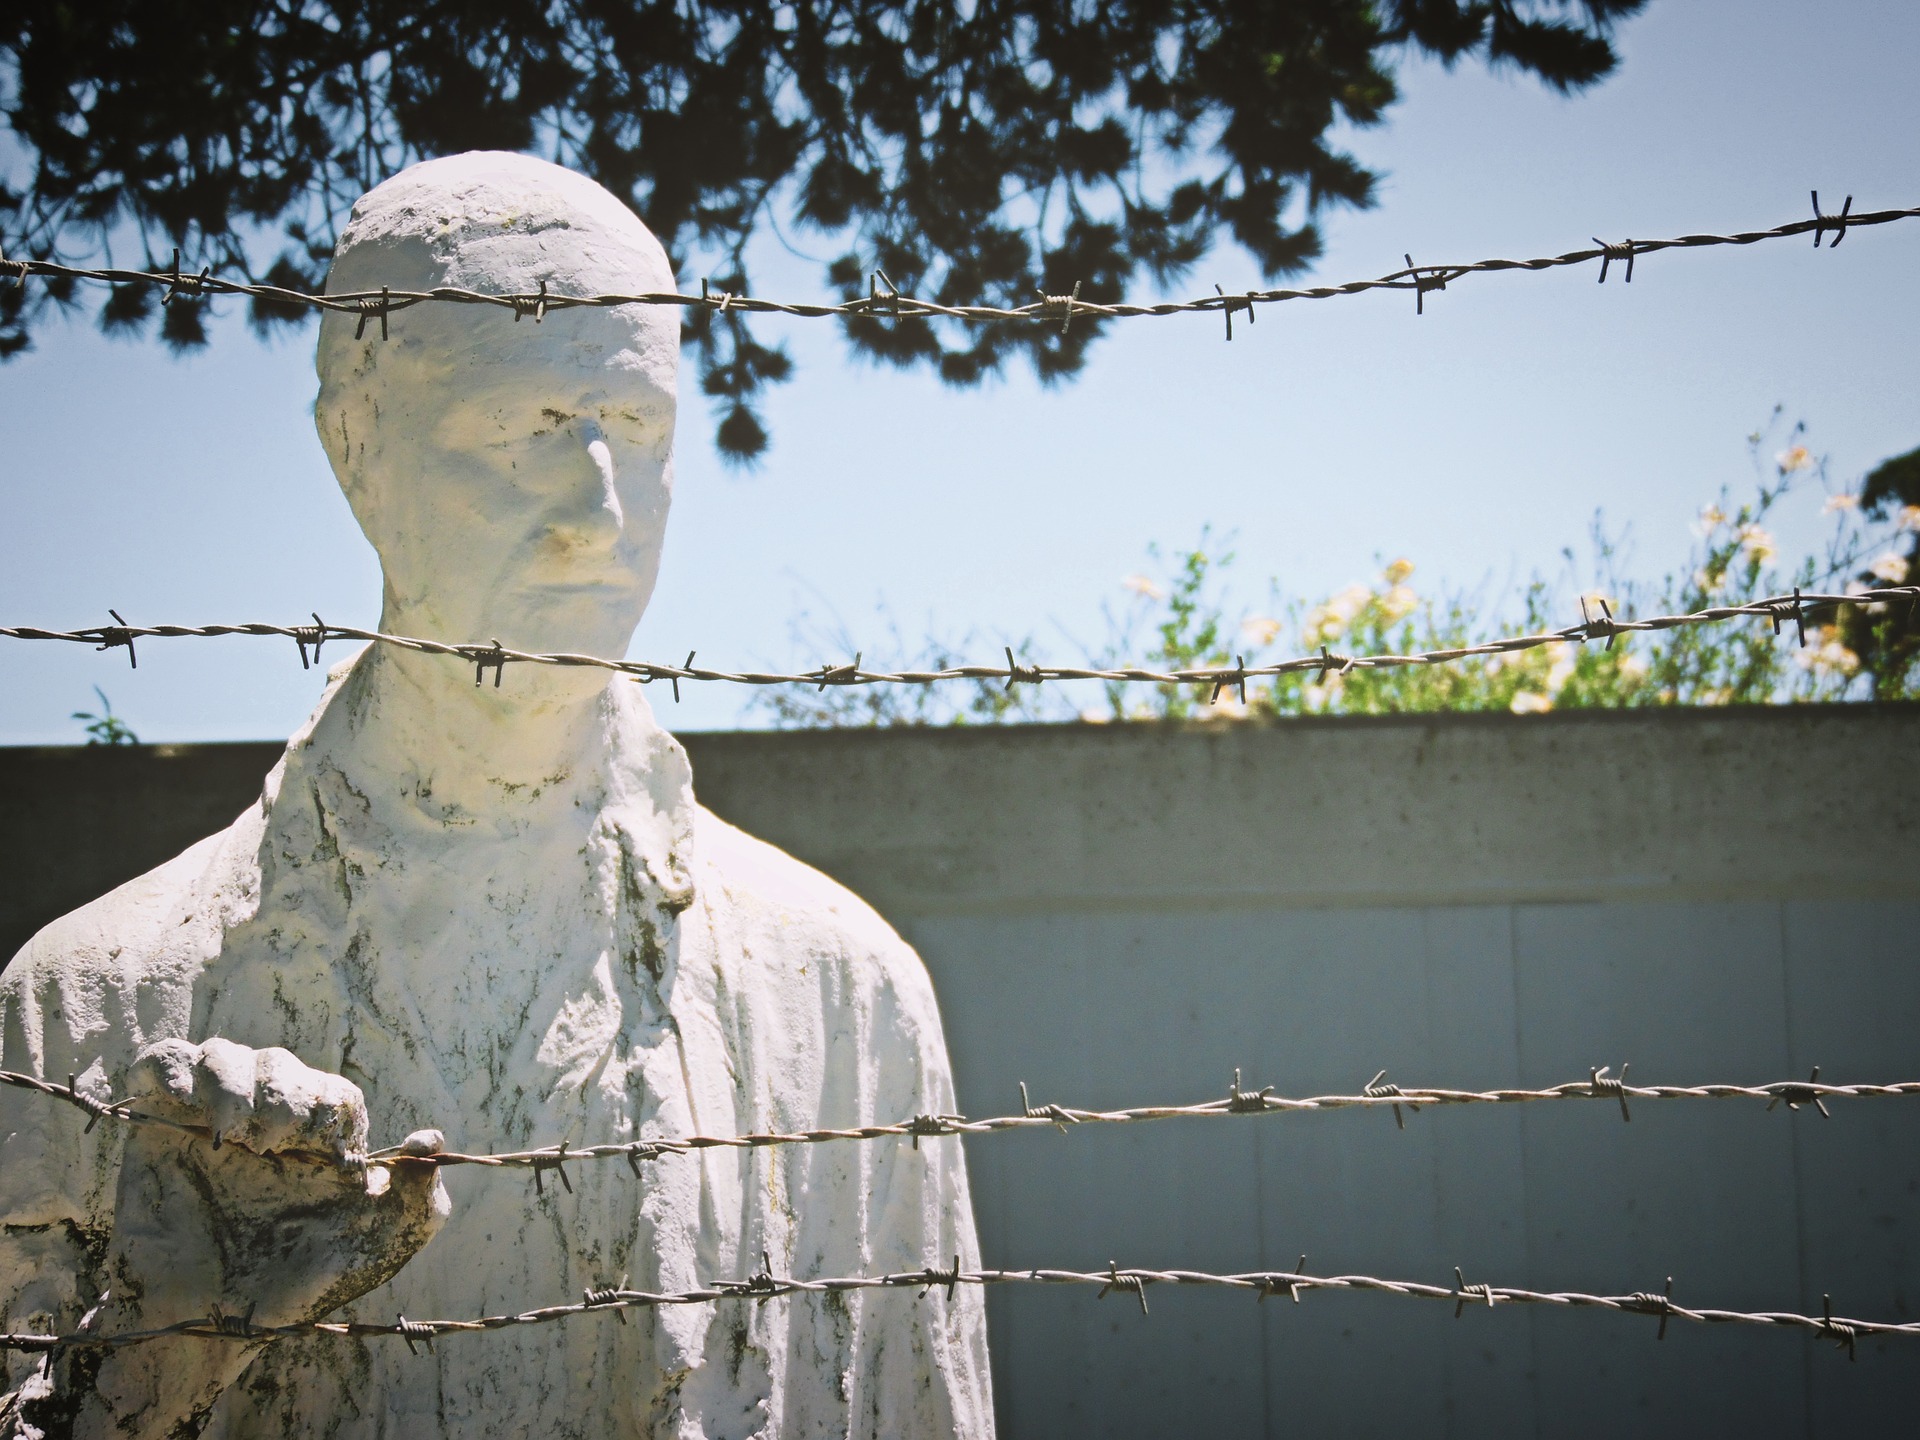 A Holocaust memorial. A statue of a man on the left behind barbed wire. His right hand rests on the barbed wire. A concrete wall in the background.